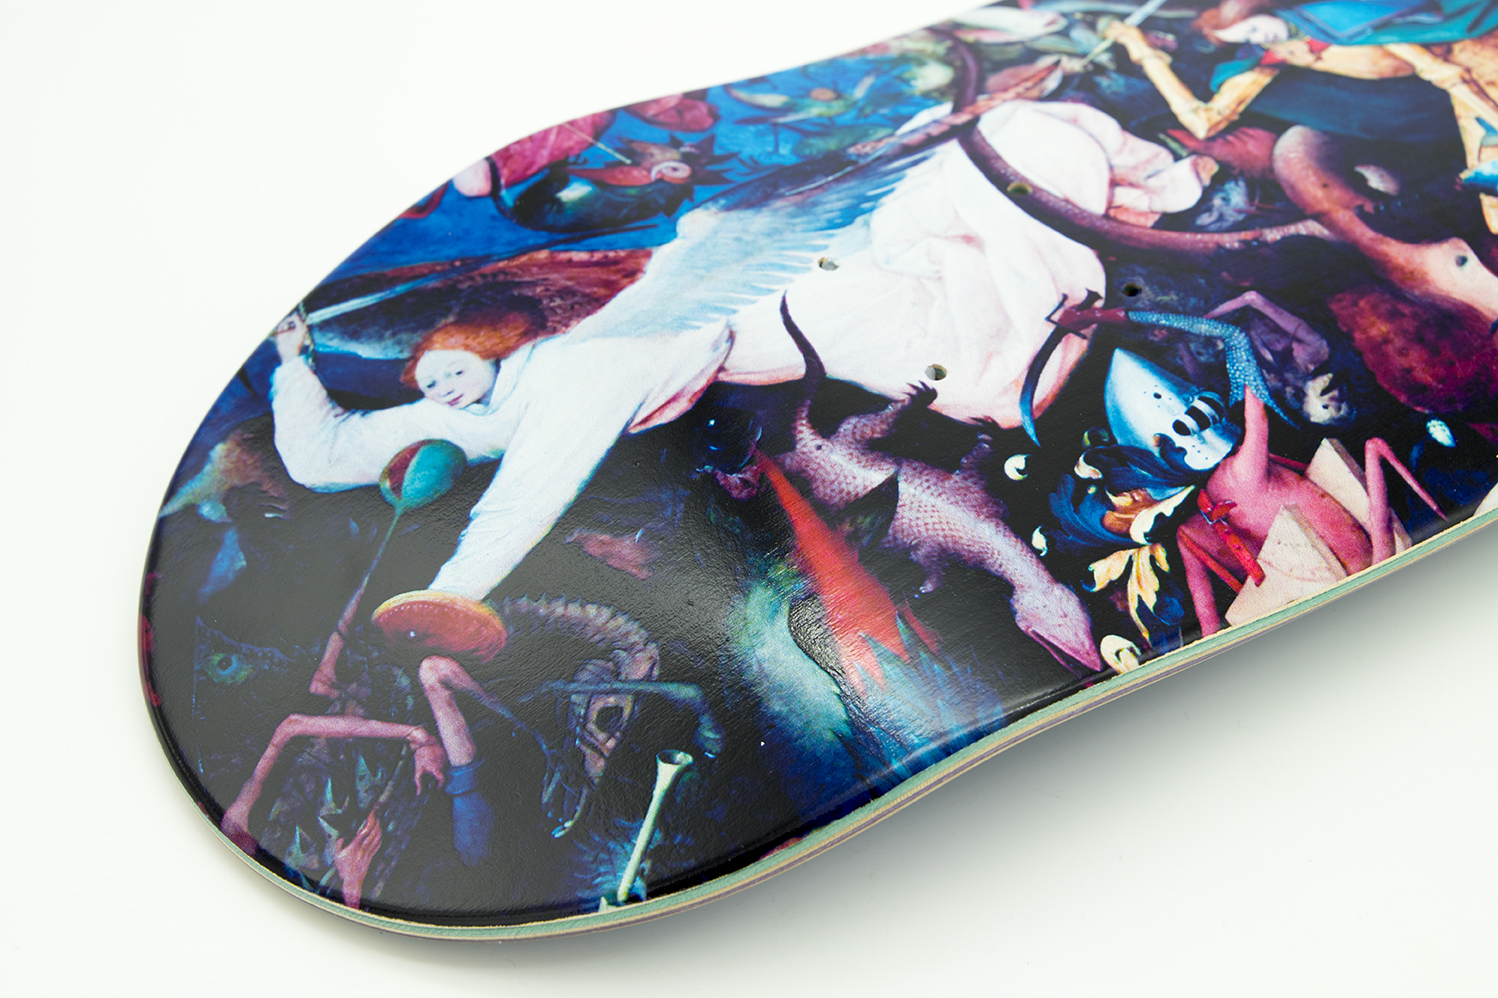 EXCESSIVE FORCE "In Your Blood" Limited Skatedeck Edition